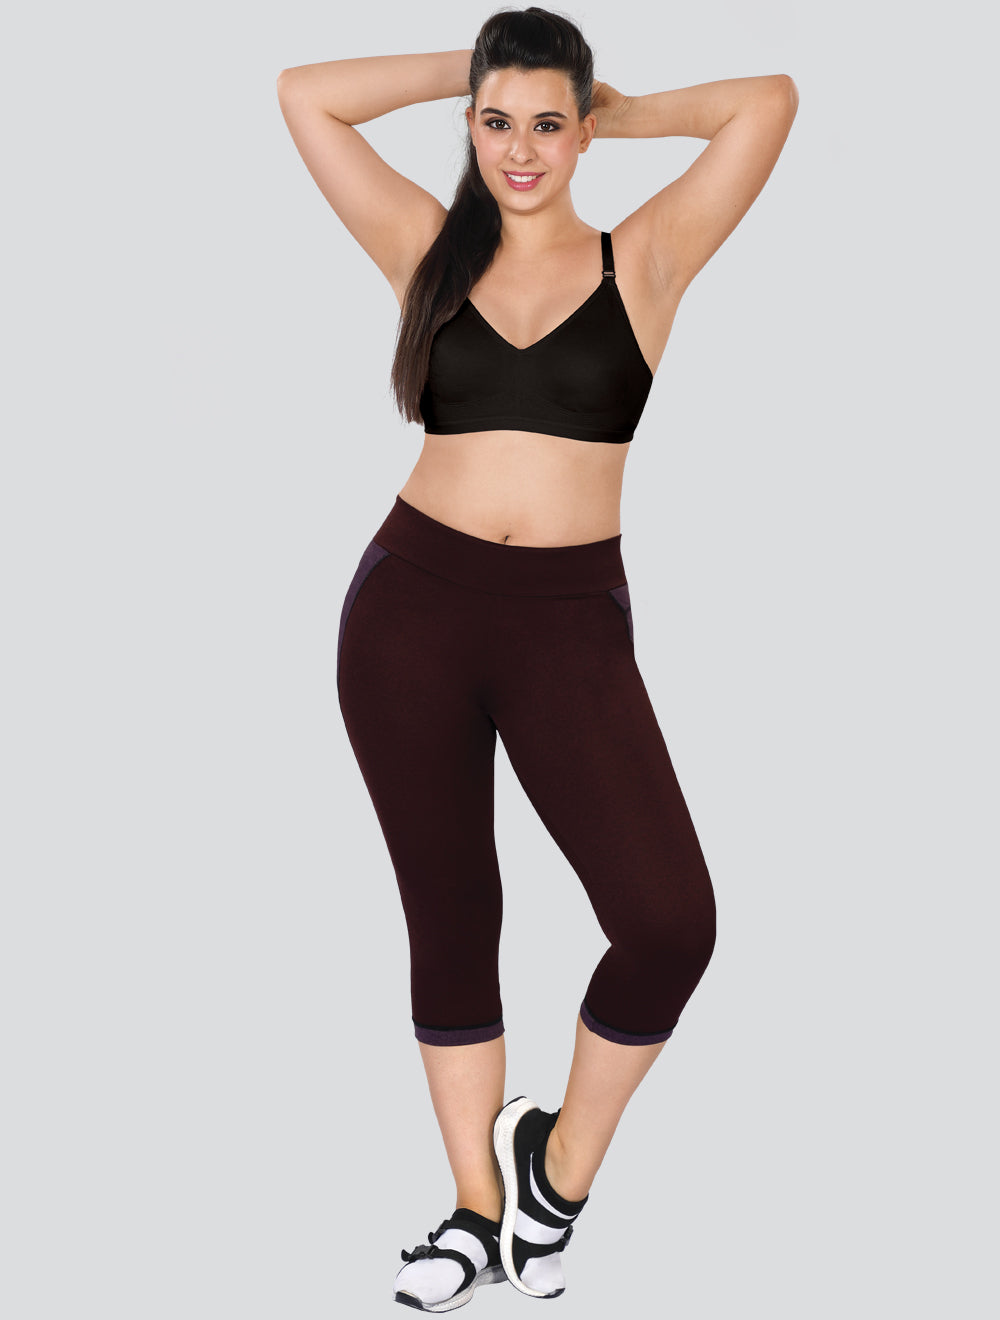 Stretch Is Comfort Womens, Girls and Plus Size Capri Yoga Pants, India